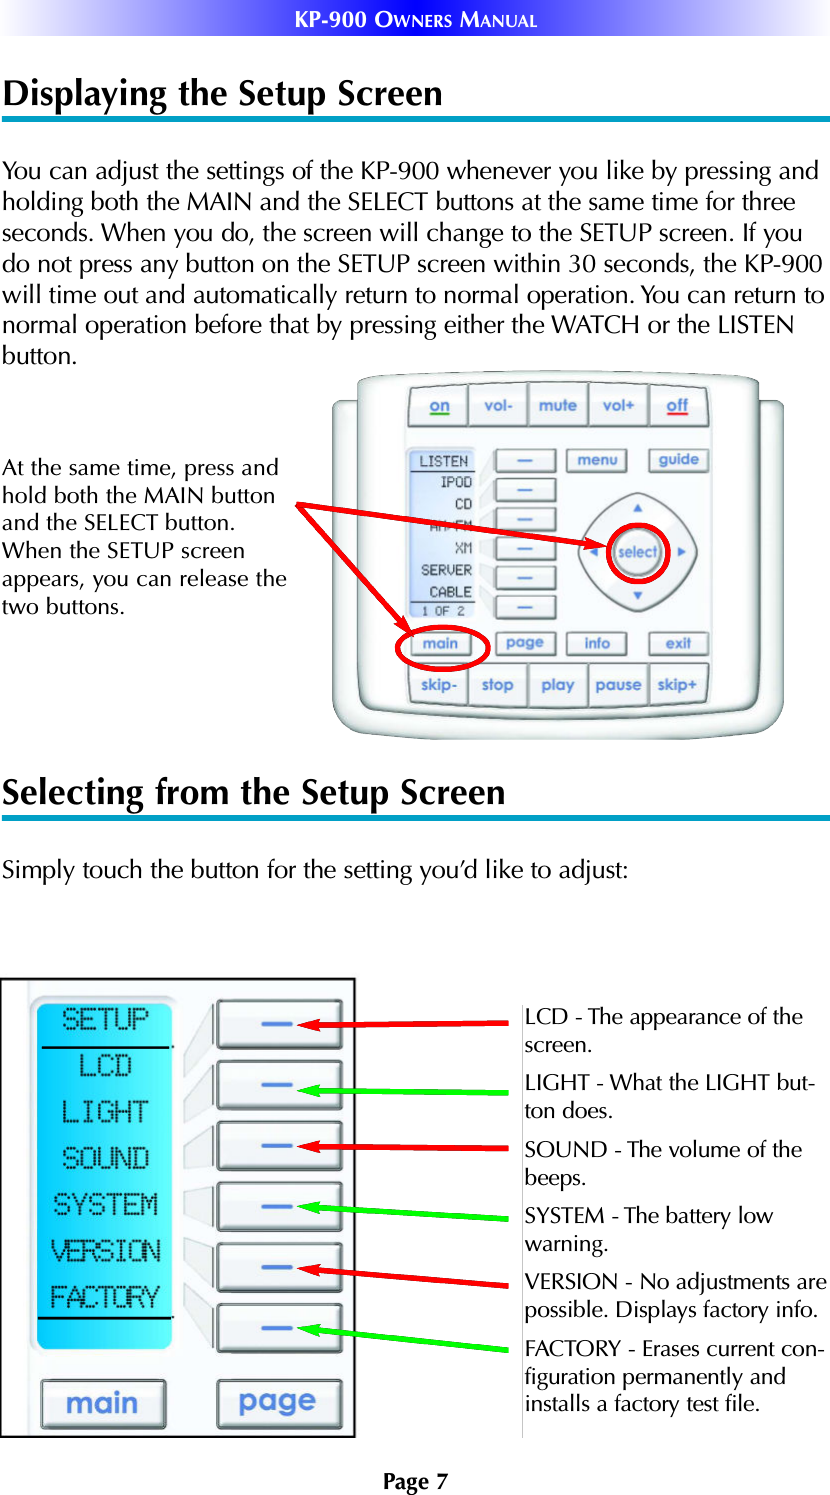 Displaying the Setup ScreenYou can adjust the settings of the KP-900 whenever you like by pressing andholding both the MAIN and the SELECT buttons at the same time for threeseconds. When you do, the screen will change to the SETUP screen. If youdo not press any button on the SETUP screen within 30 seconds, the KP-900will time out and automatically return to normal operation. You can return tonormal operation before that by pressing either the WATCH or the LISTENbutton.Selecting from the Setup ScreenSimply touch the button for the setting you’d like to adjust:At the same time, press andhold both the MAIN buttonand the SELECT button.When the SETUP screenappears, you can release thetwo buttons.Page 7KP-900 OWNERS MANUALLCD - The appearance of the screen.LIGHT - What the LIGHT but-ton does.SOUND - The volume of thebeeps.SYSTEM - The battery lowwarning.VERSION - No adjustments arepossible. Displays factory info.FACTORY - Erases current con-figuration permanently andinstalls a factory test file.